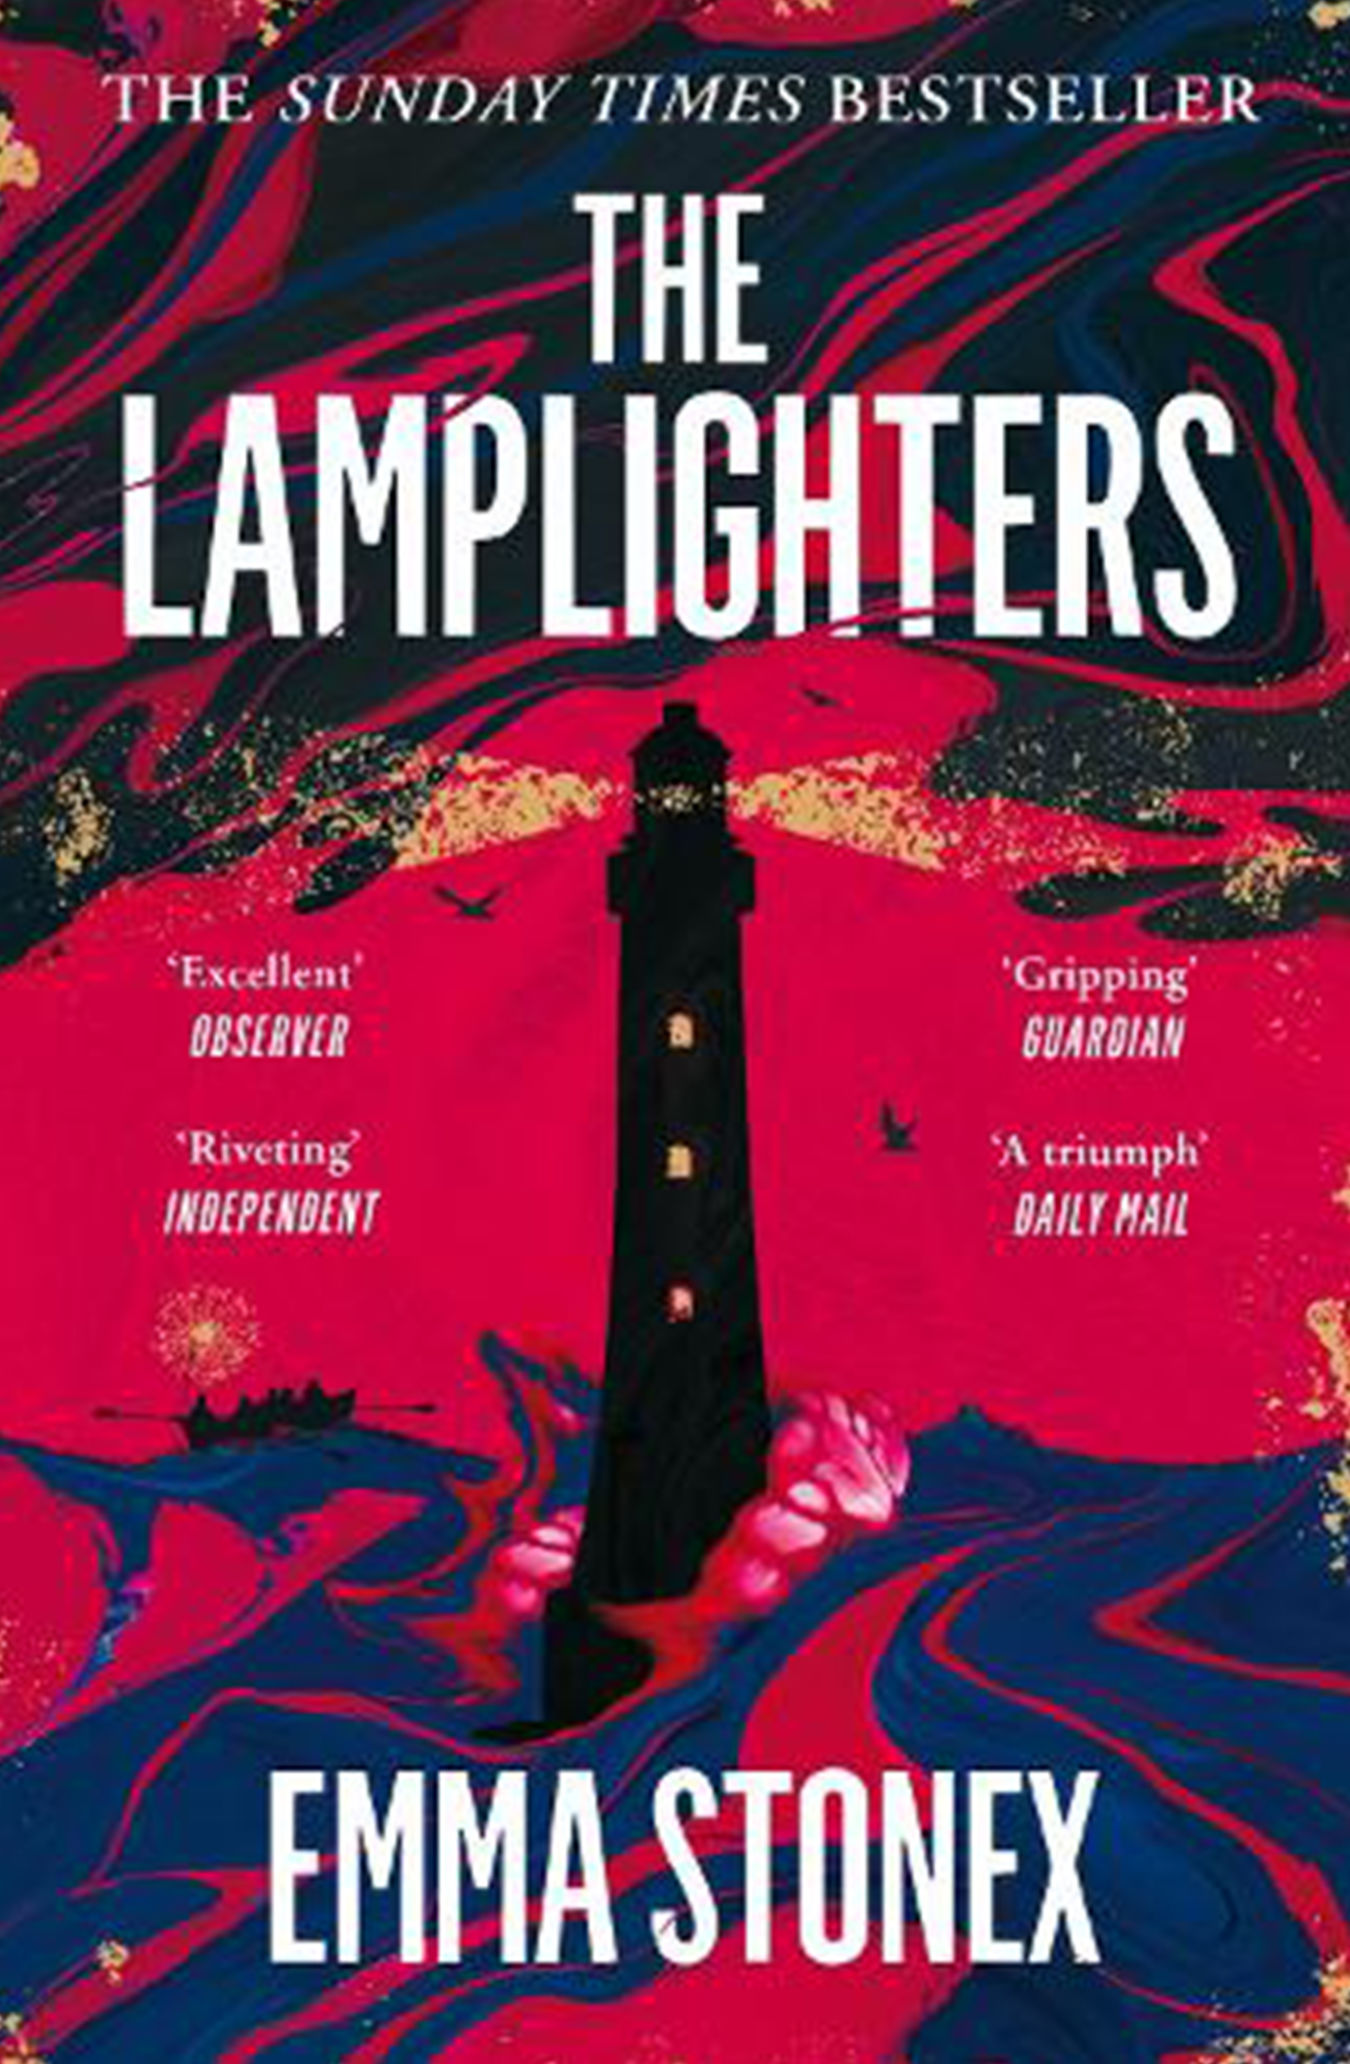 The Lamplighters by Emma Stonex